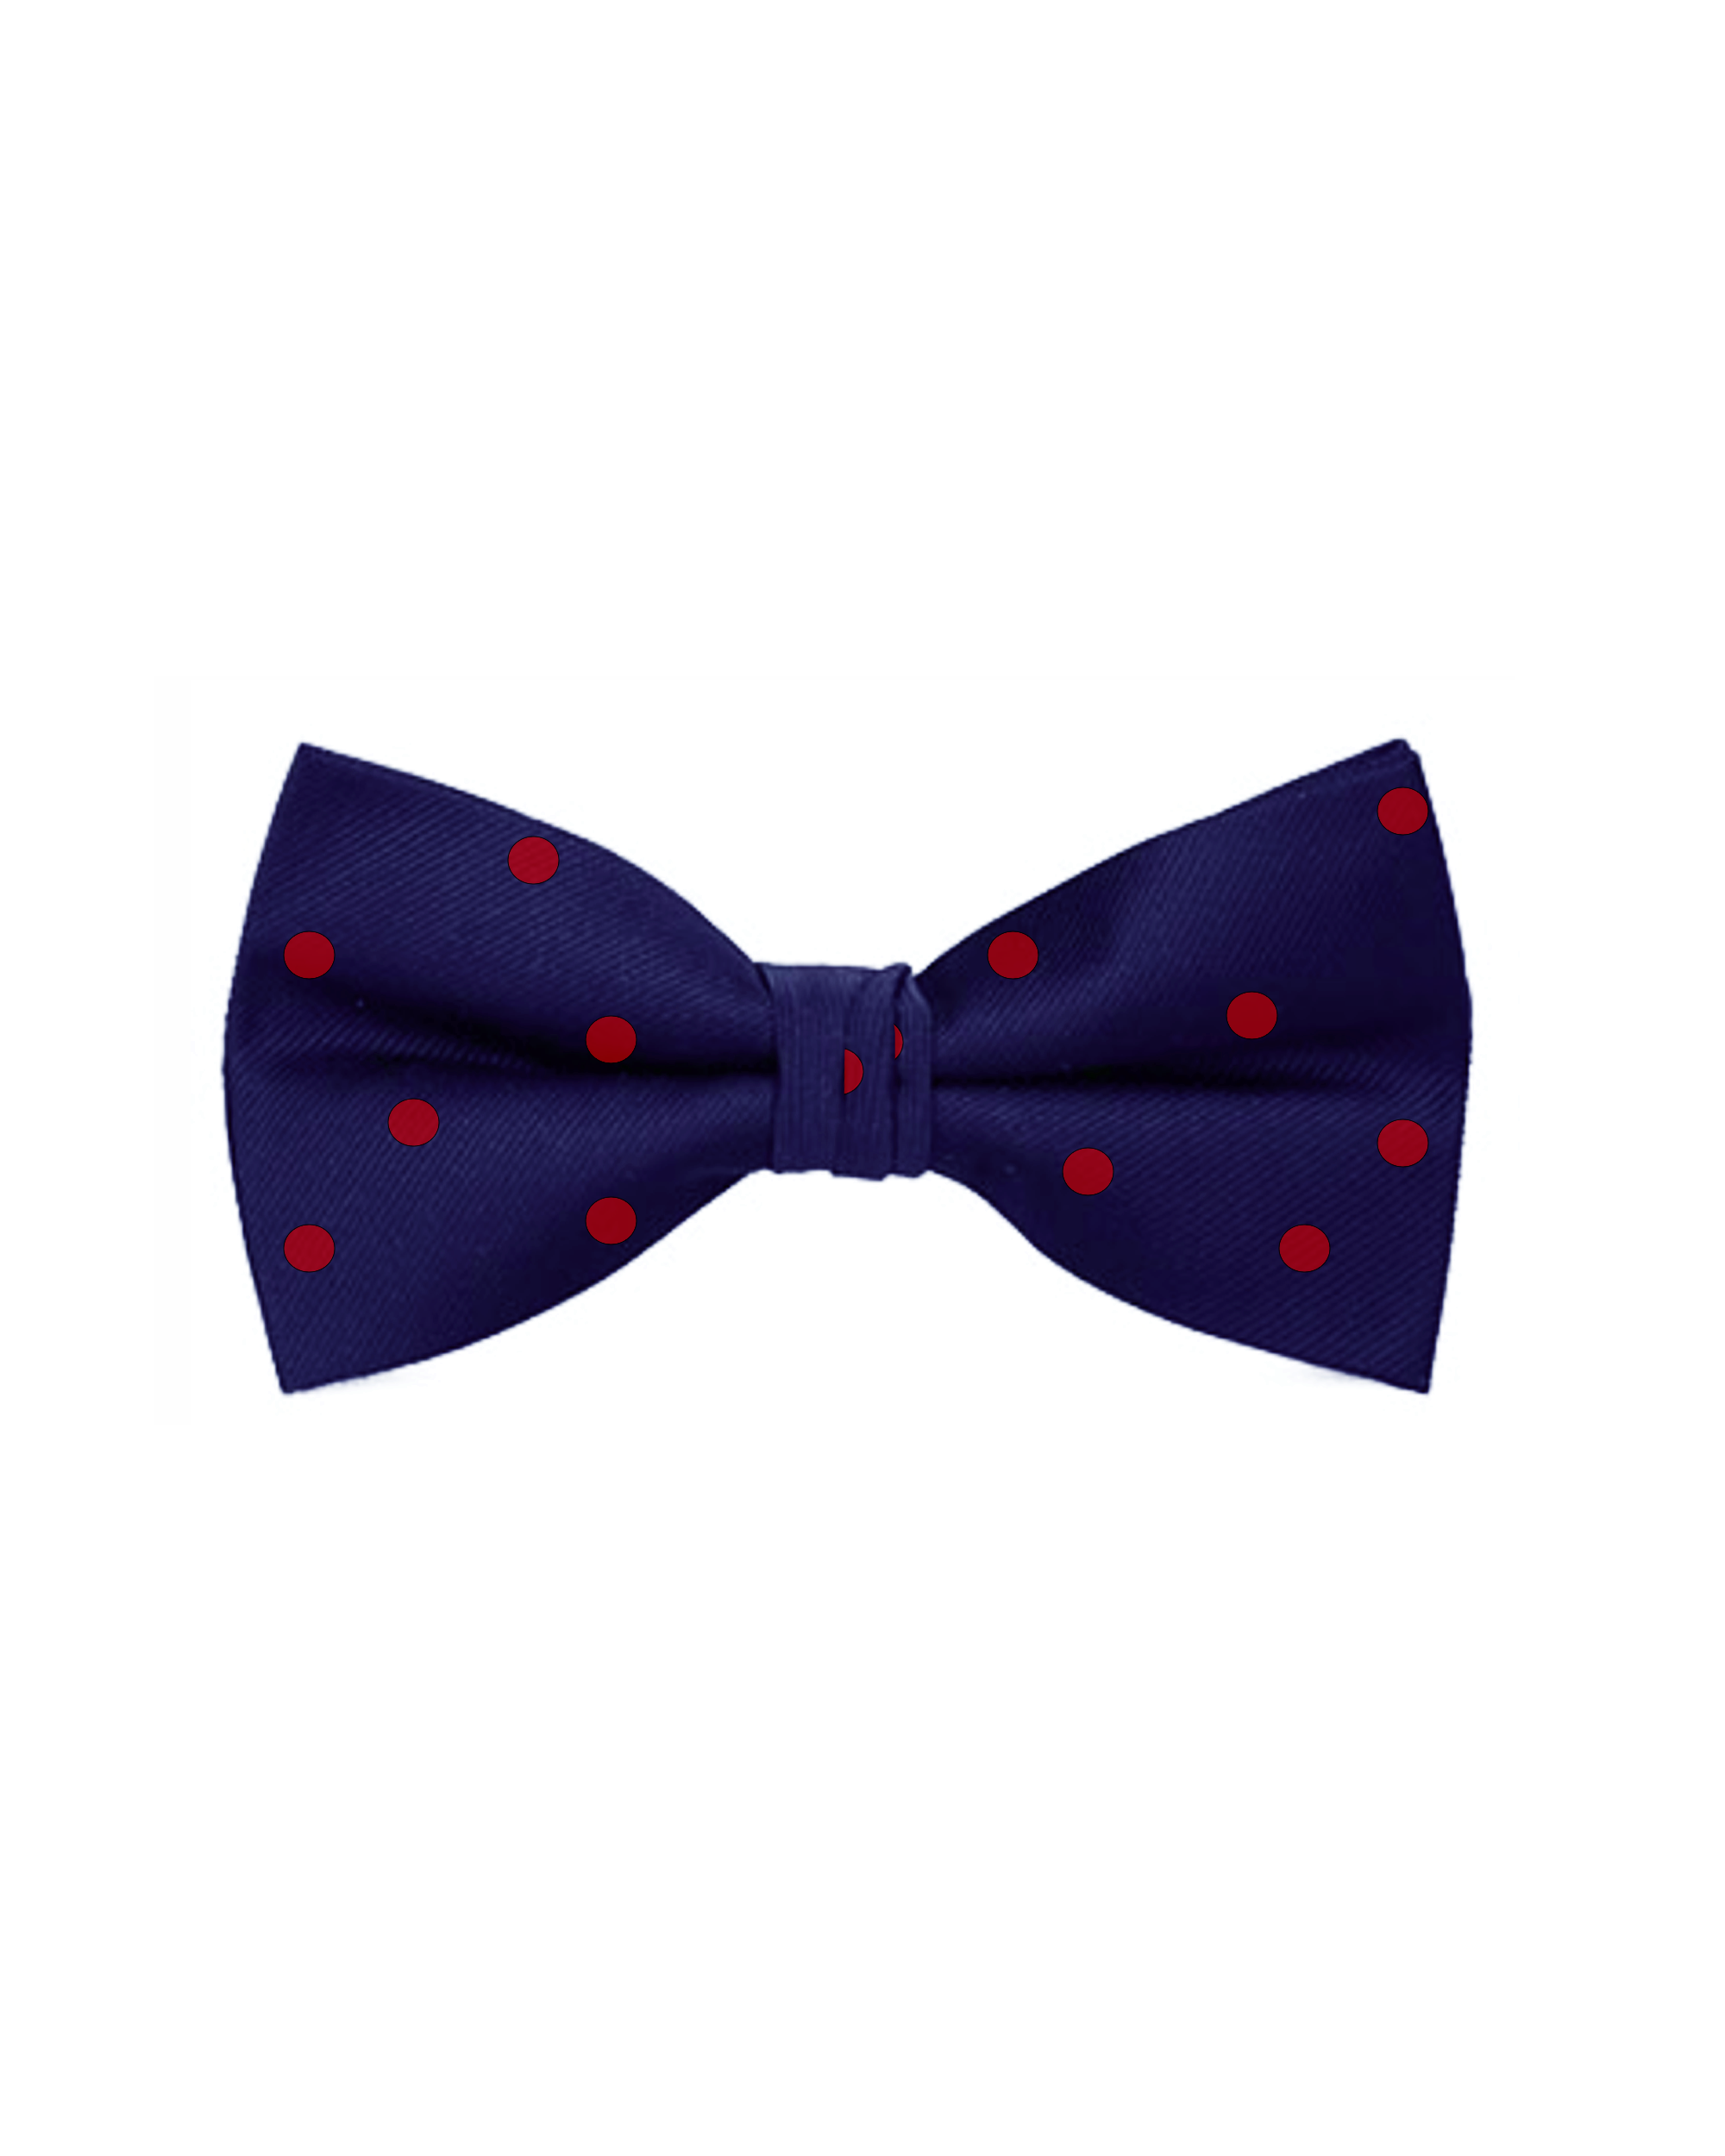 Red Dots Bow Tie (Navy Blue)